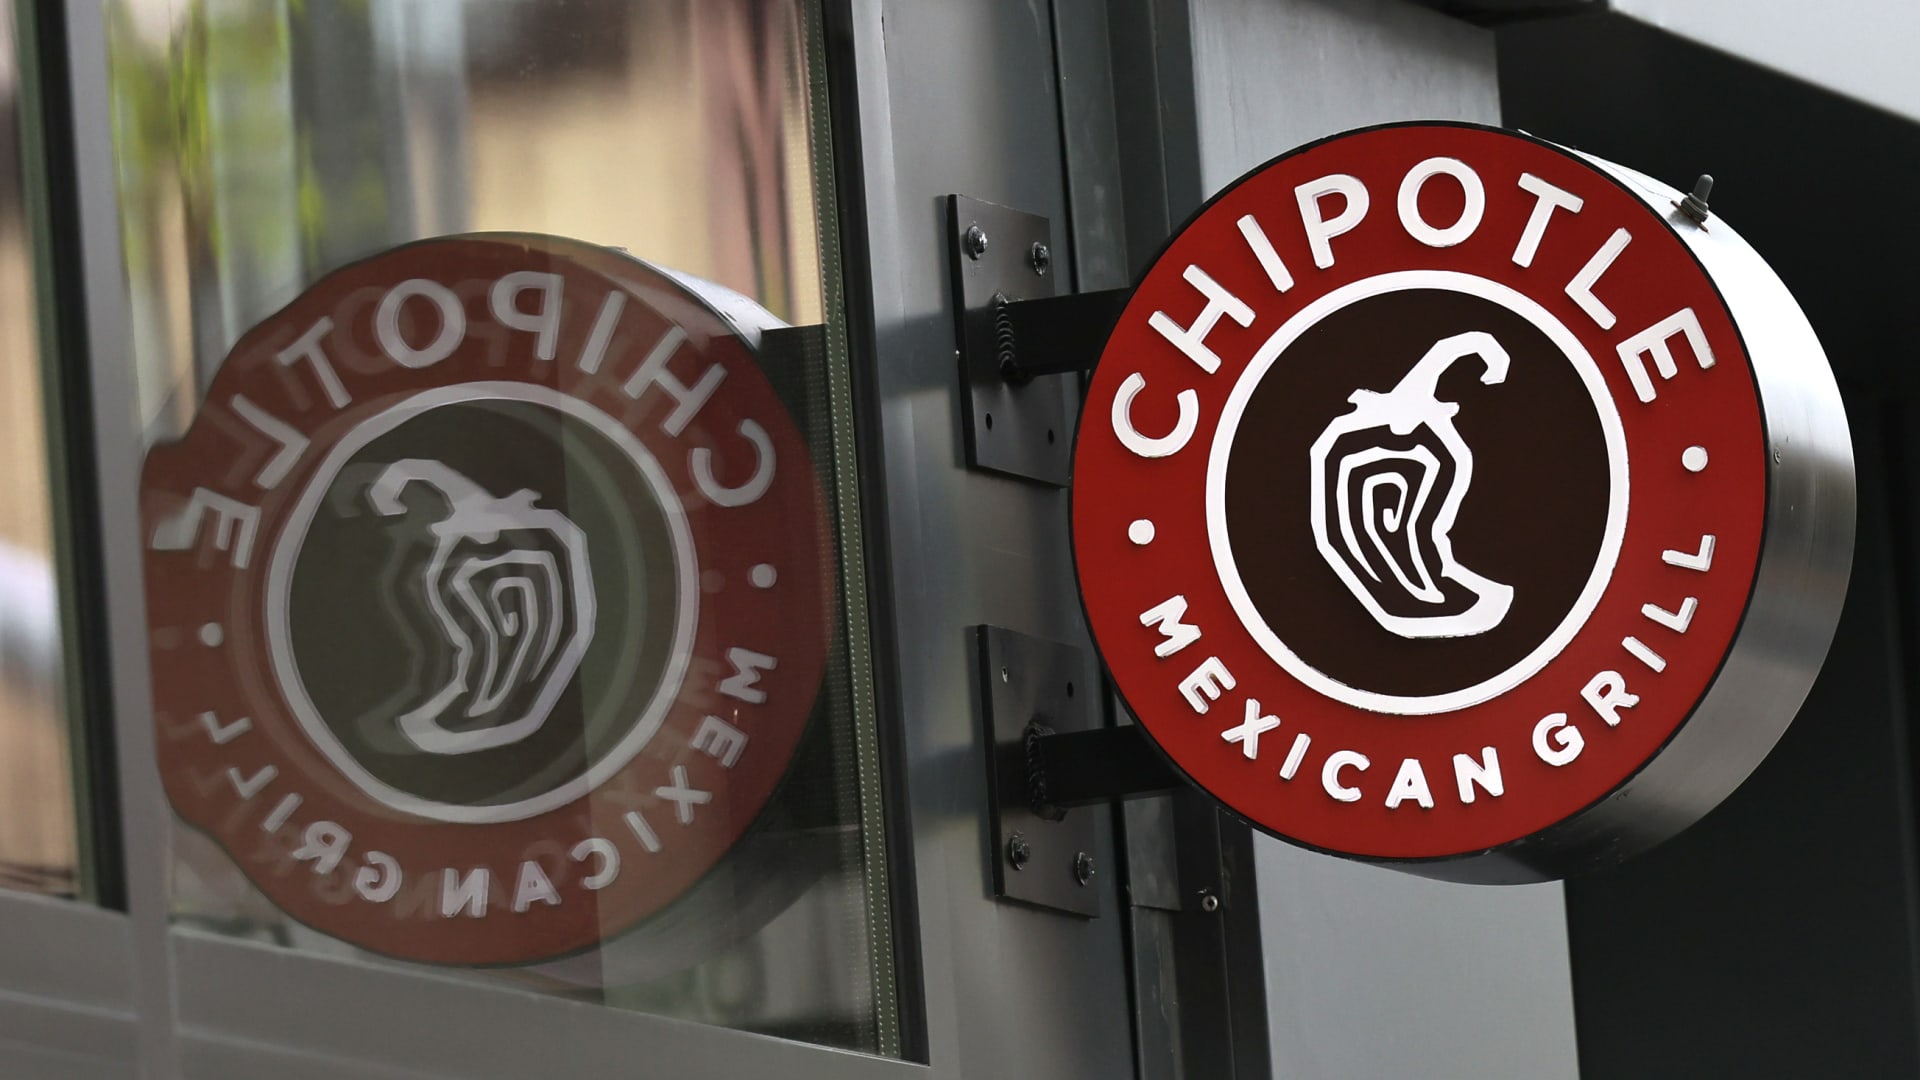 Chipotle restaurants in Michigan vote to organize, a first for the chain